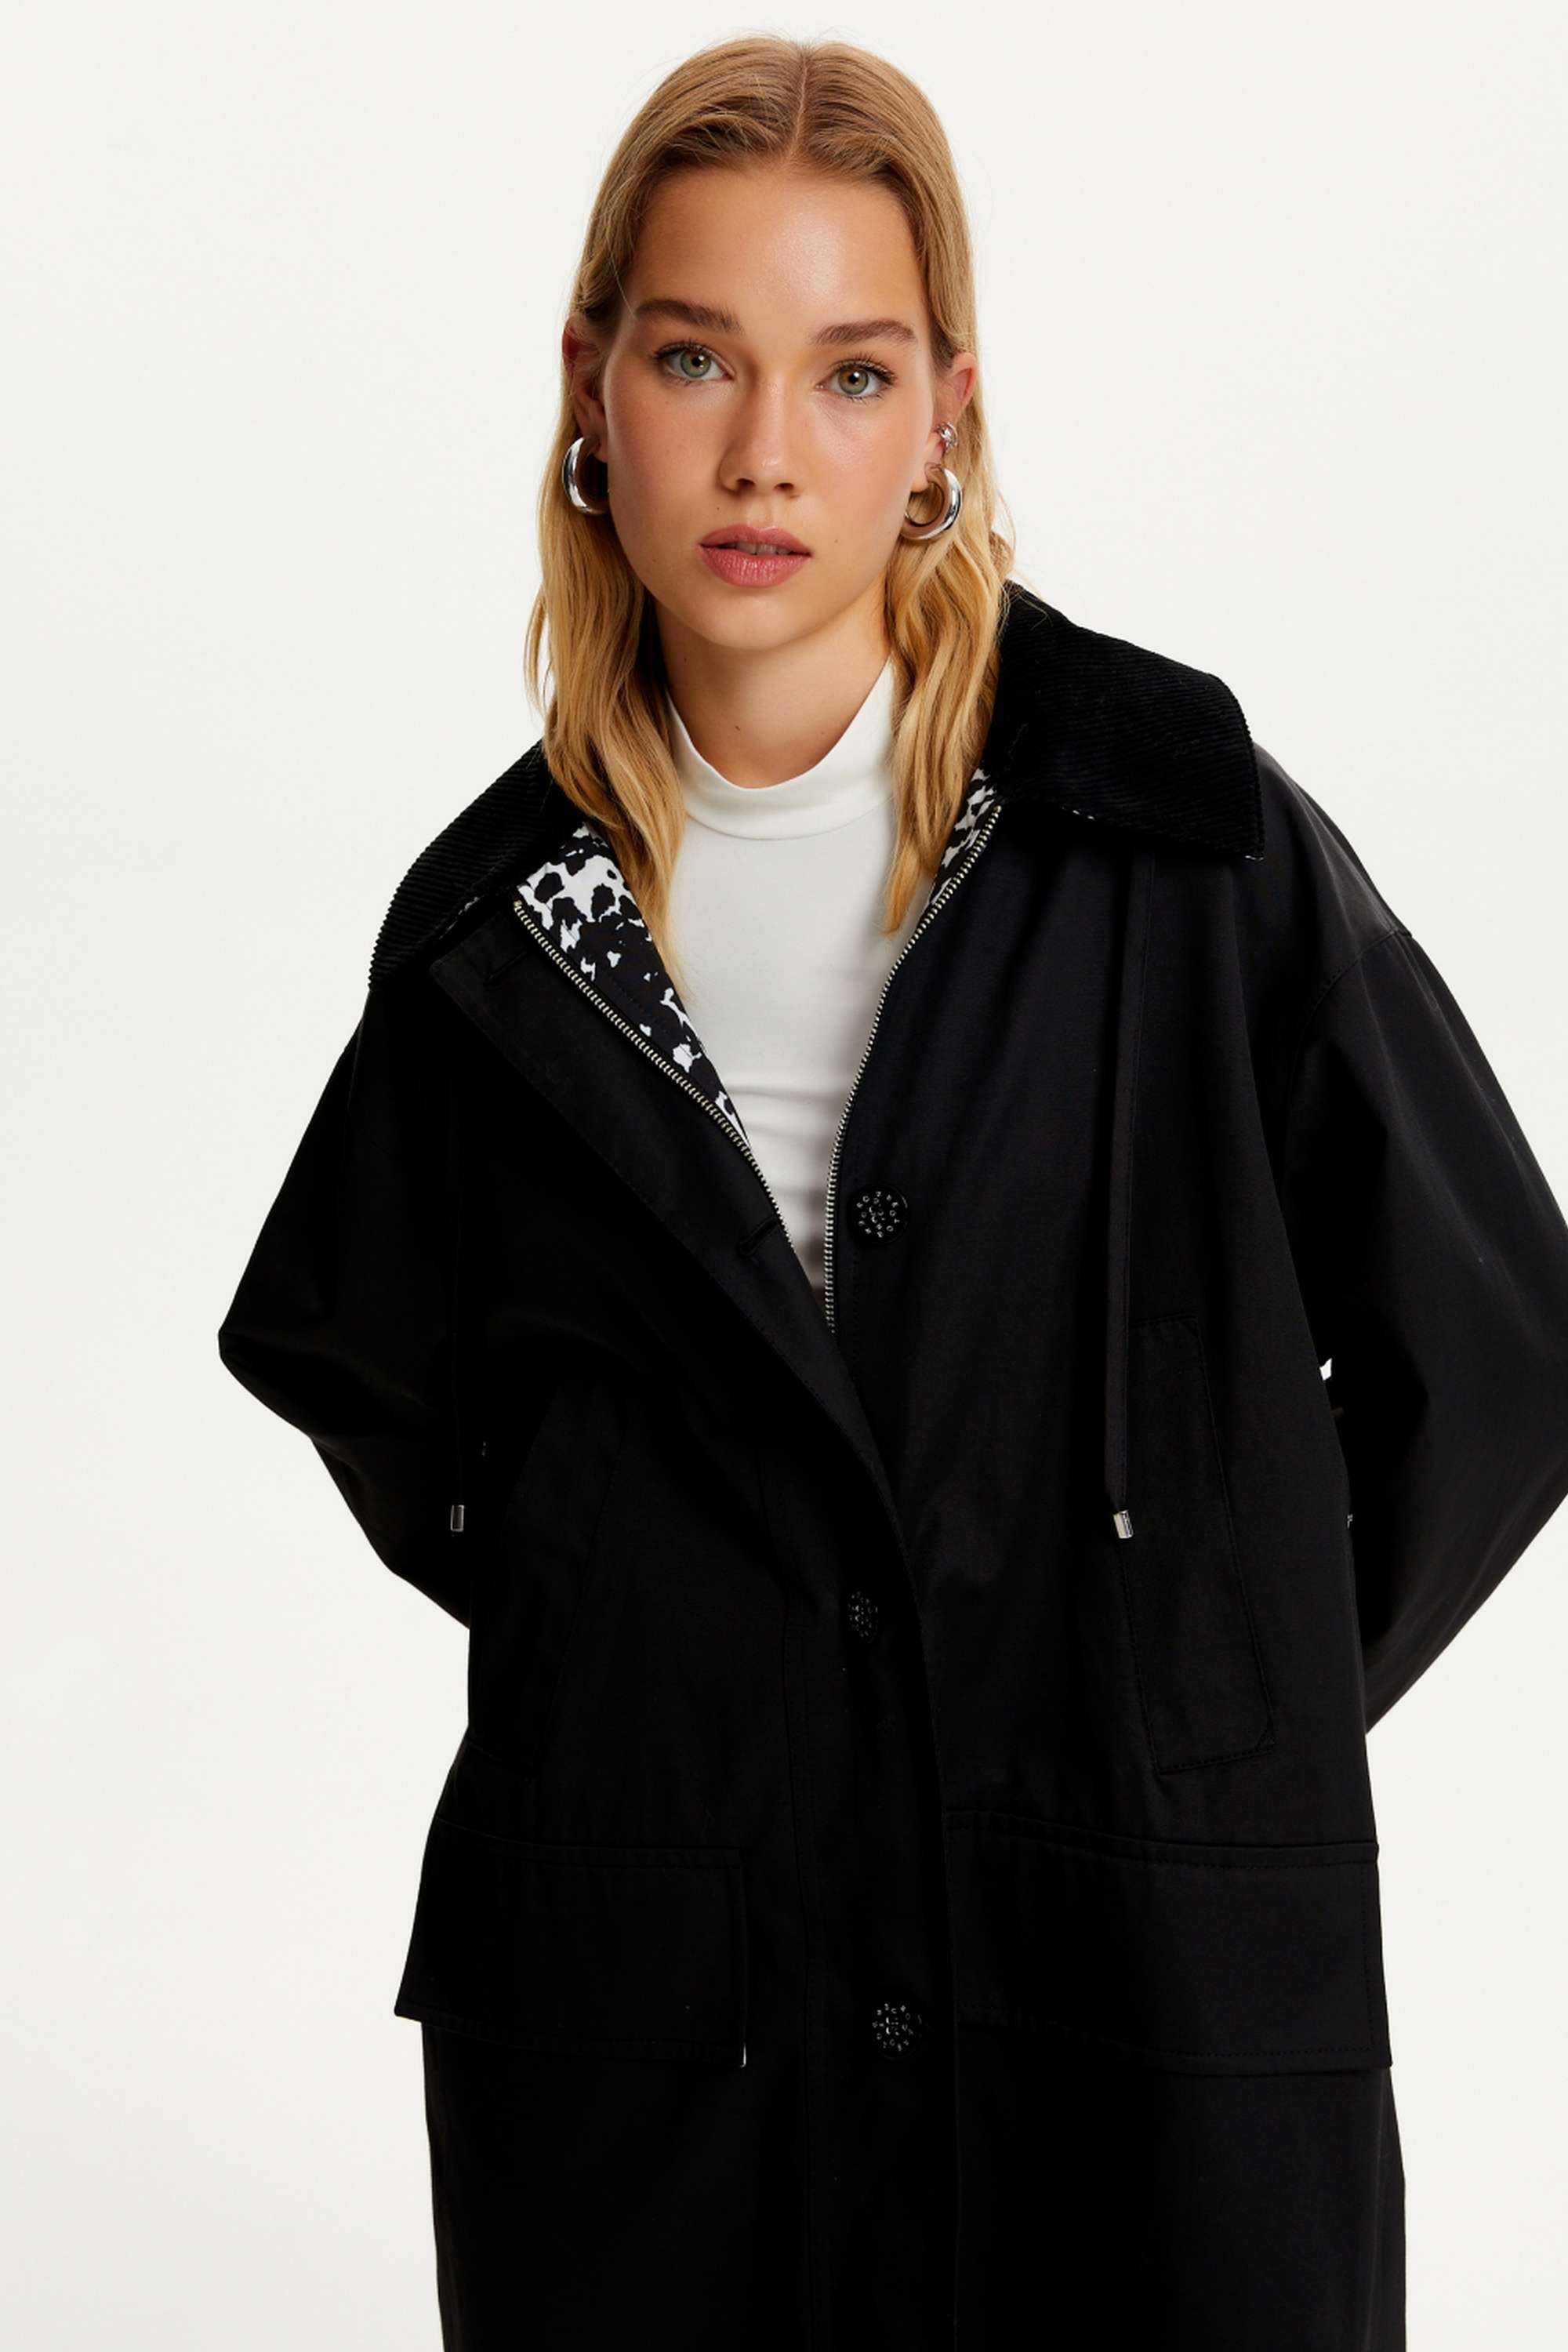 Oversize Hooded Trench Coat